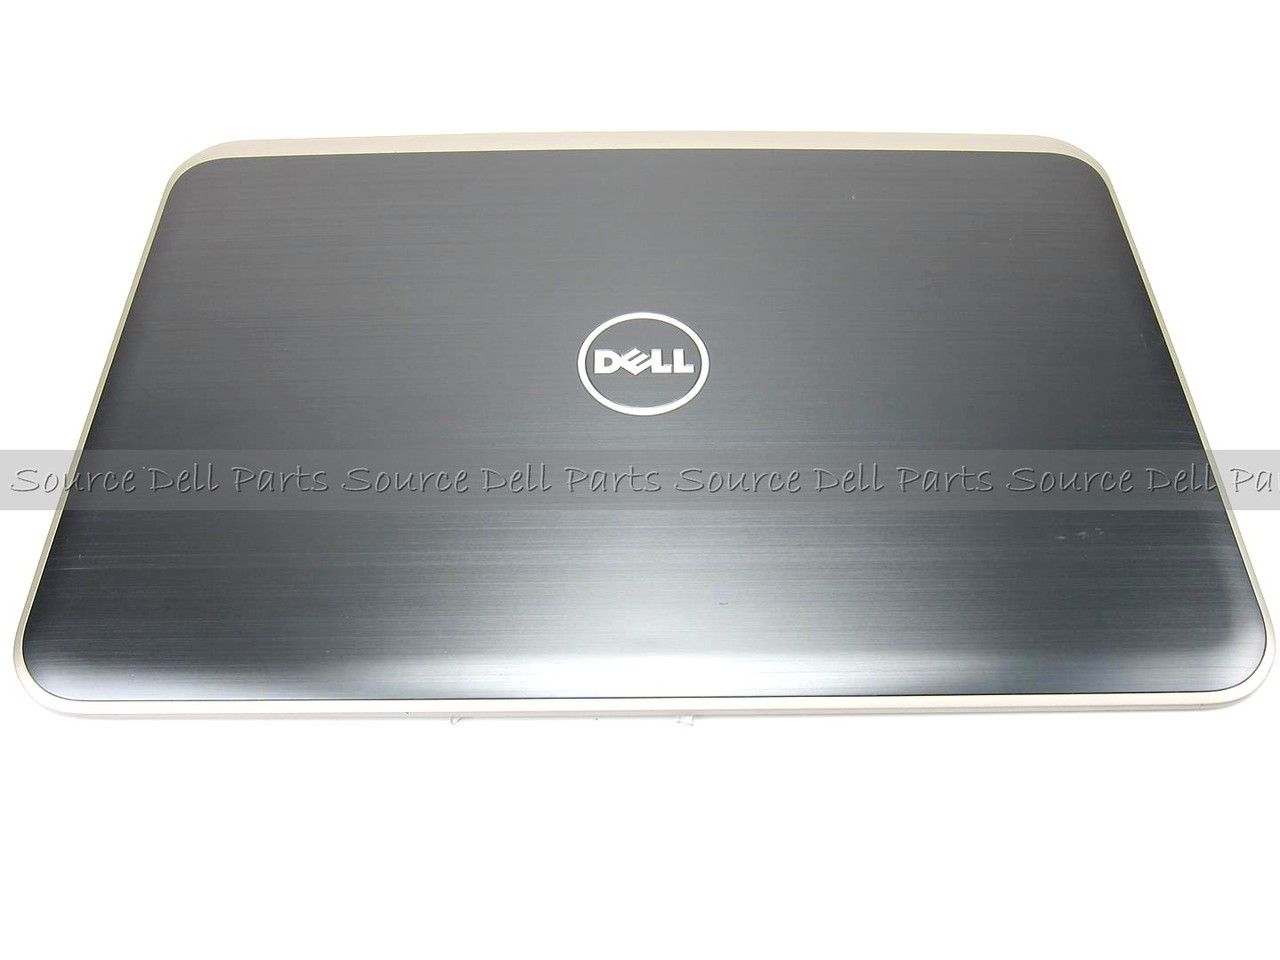 Dell Inspiron 15z (5523) 15.6" TouchScreen LCD Back Cover - 1D3M0 (B)